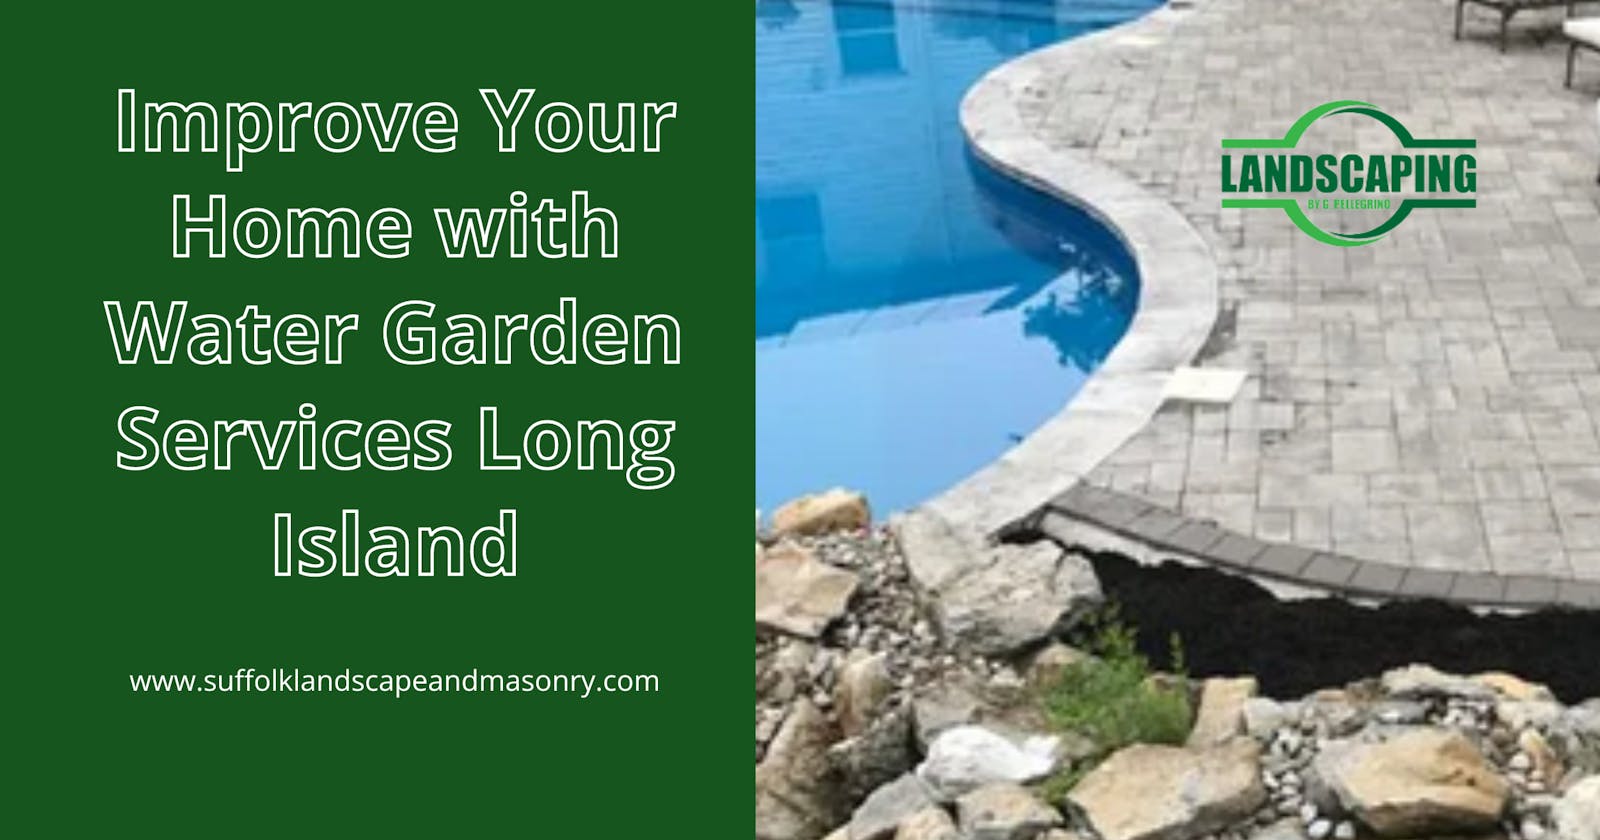 Improve Your Home with Water Garden Services Long Island